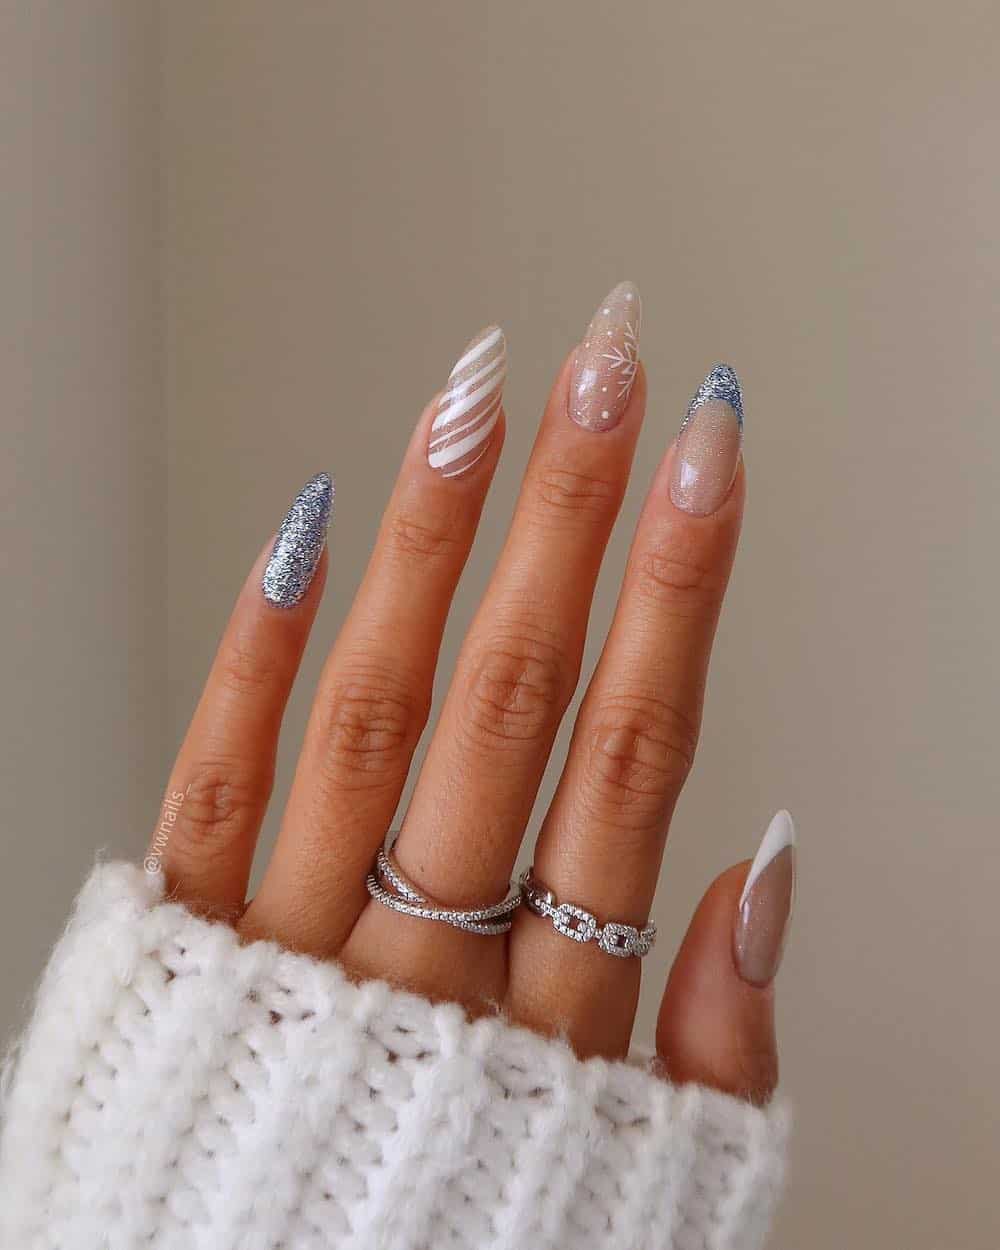 A hand with long almond nails with a multi pattern winter design including solid blue glitter nails, French tips, snowflake details, and candy cane stripes